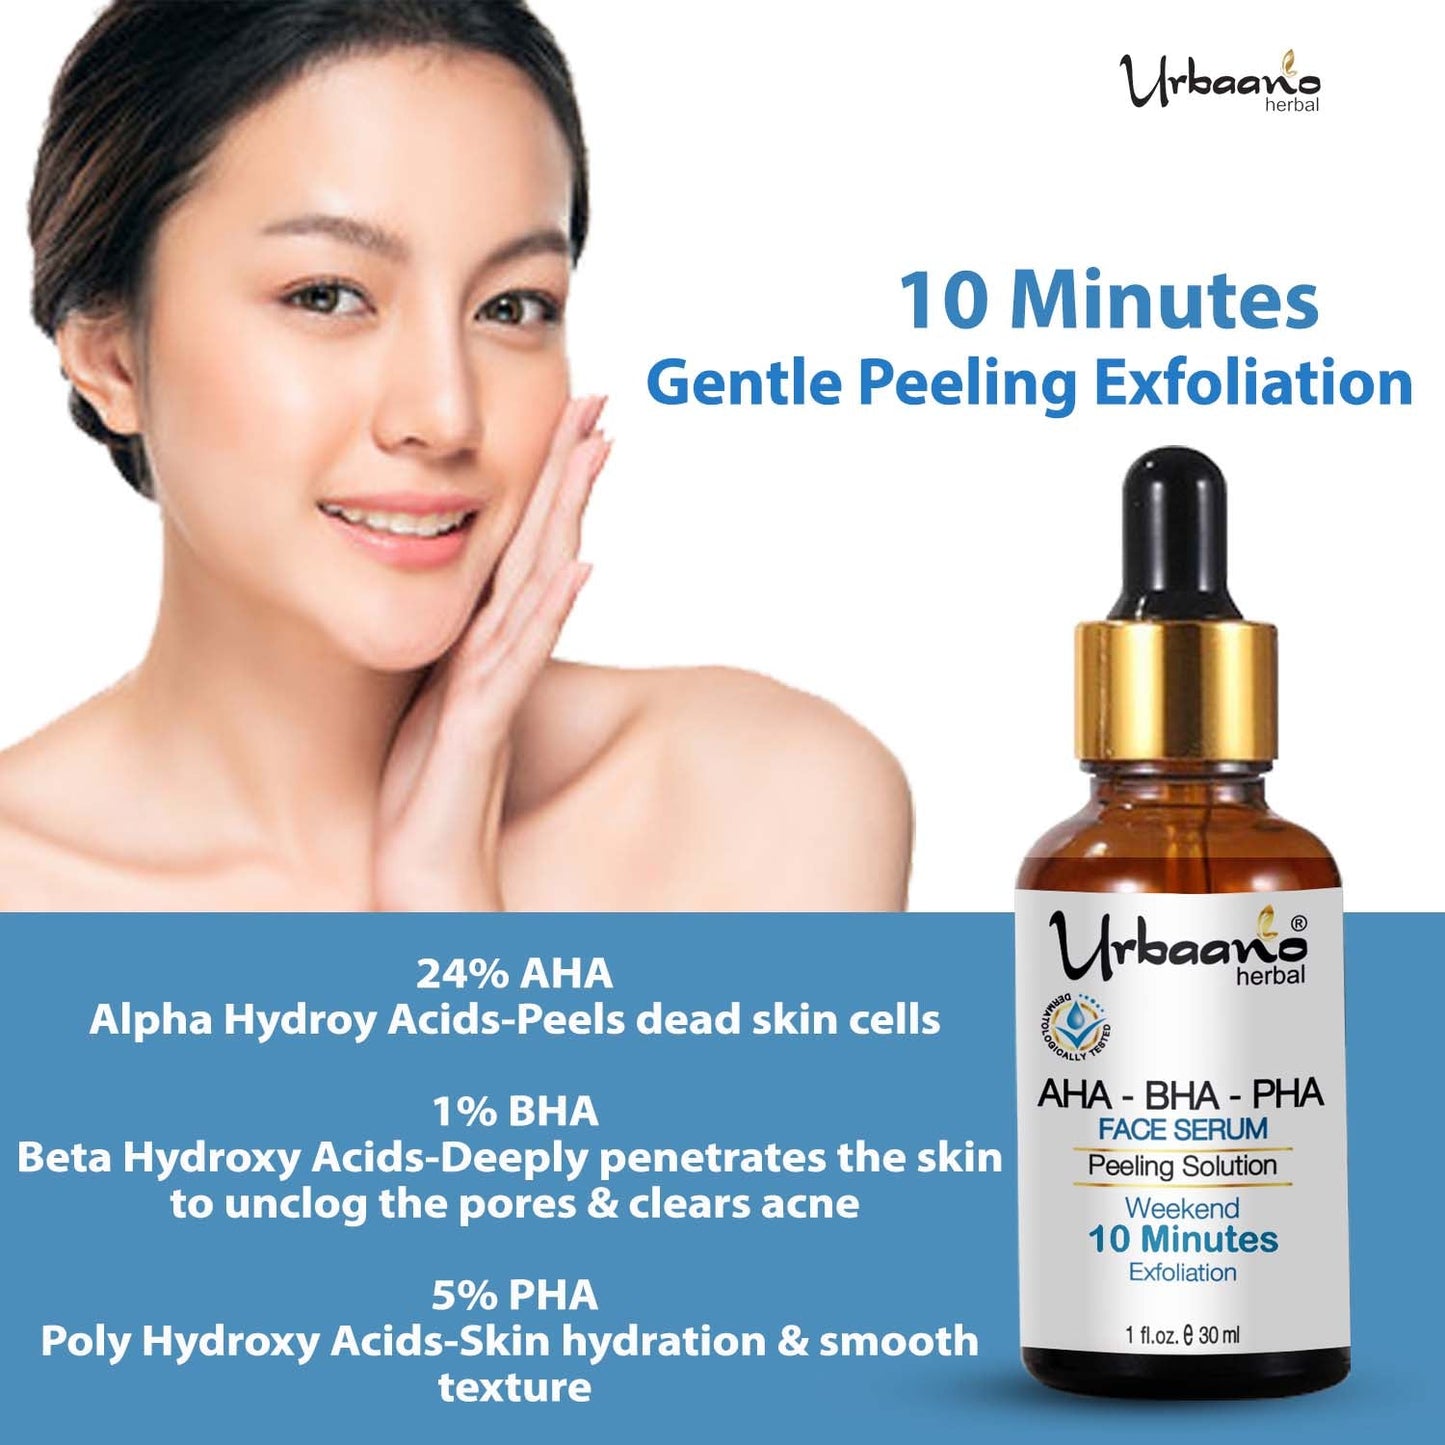 urbaano herbal aha serum combo infused with glycolic acid, lactic acid, 1% salicylic acid for skin lightening, reduce dark spot, tan , fine lines, acne. Just 10 minutes exfoliation